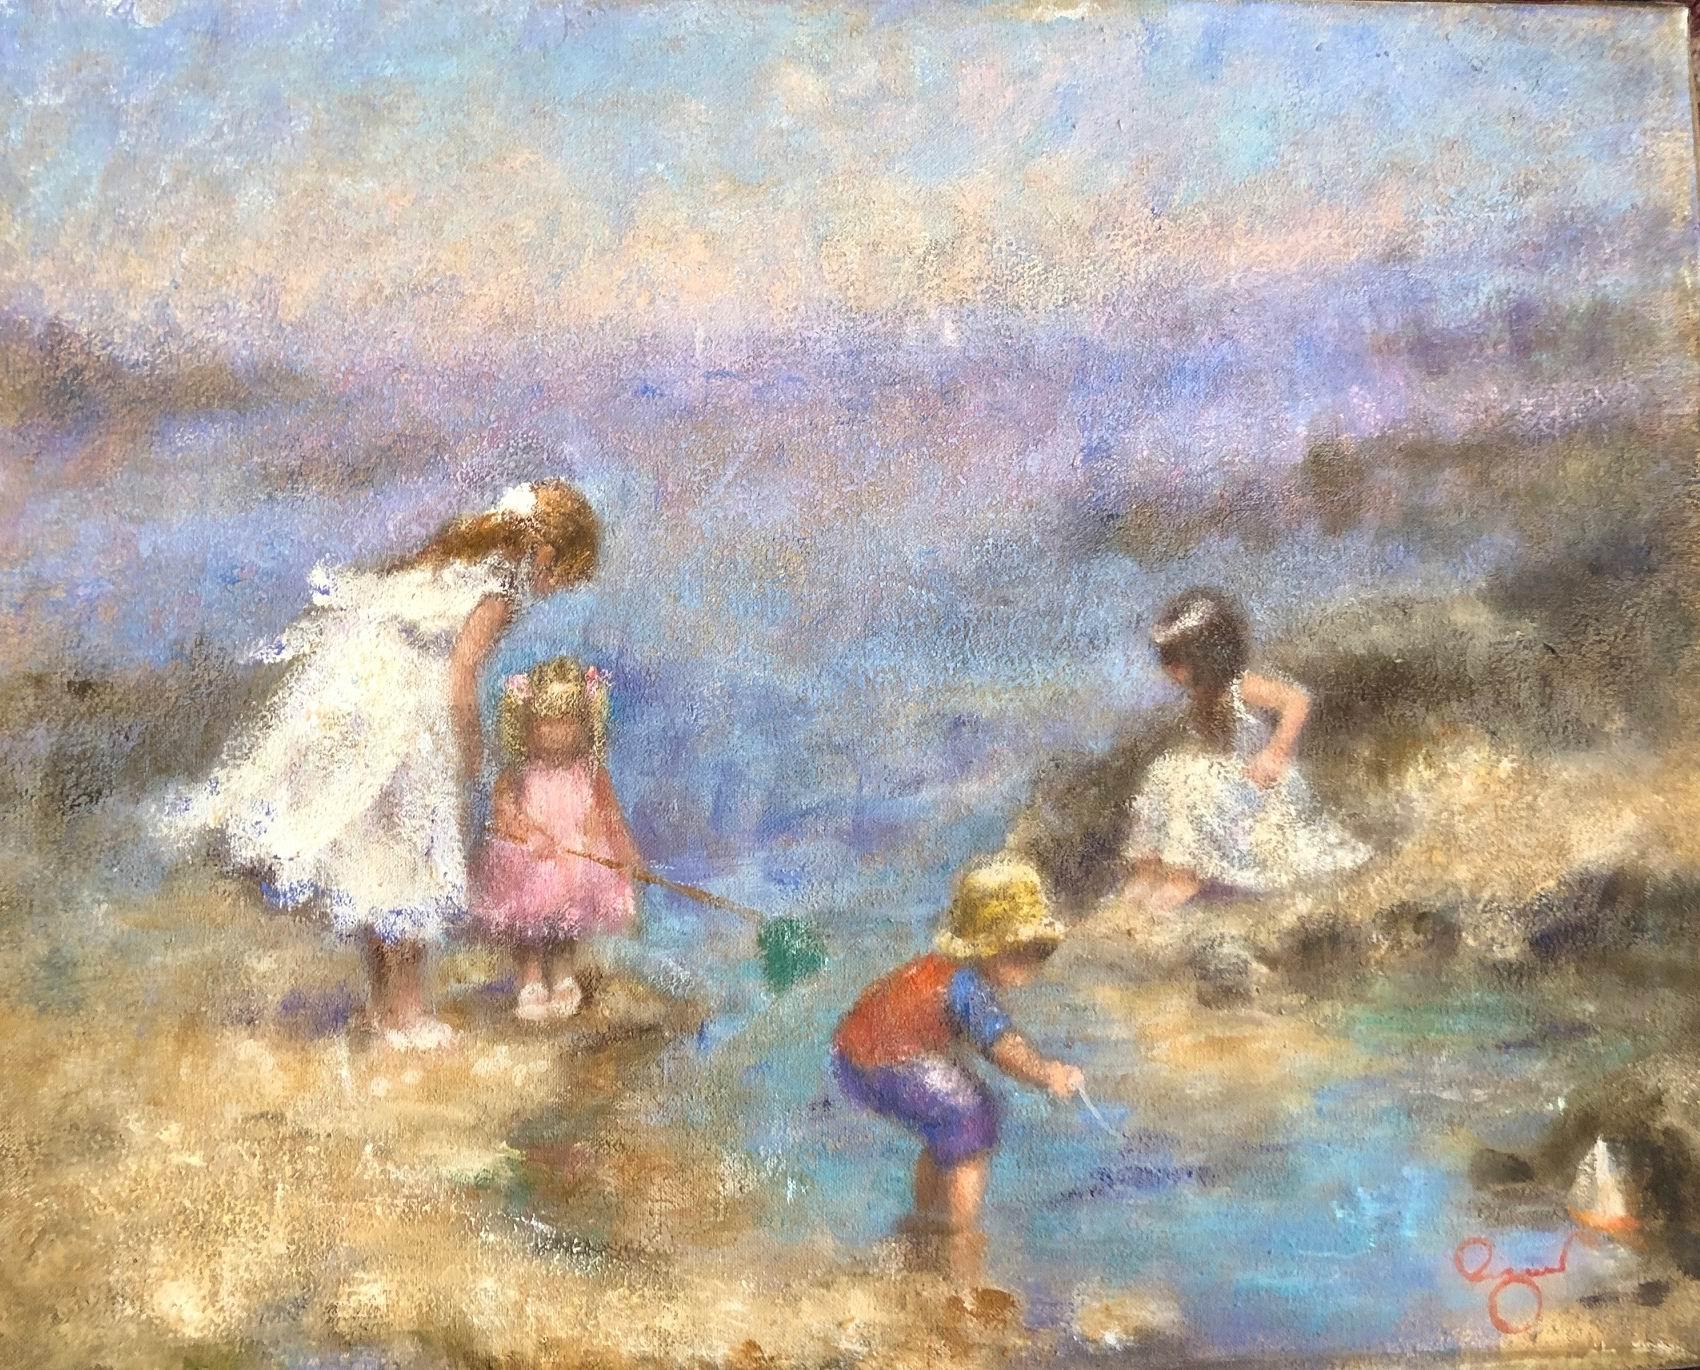 Beach scene  children at the Seaside Playing in a Rockpool - Large oil painting